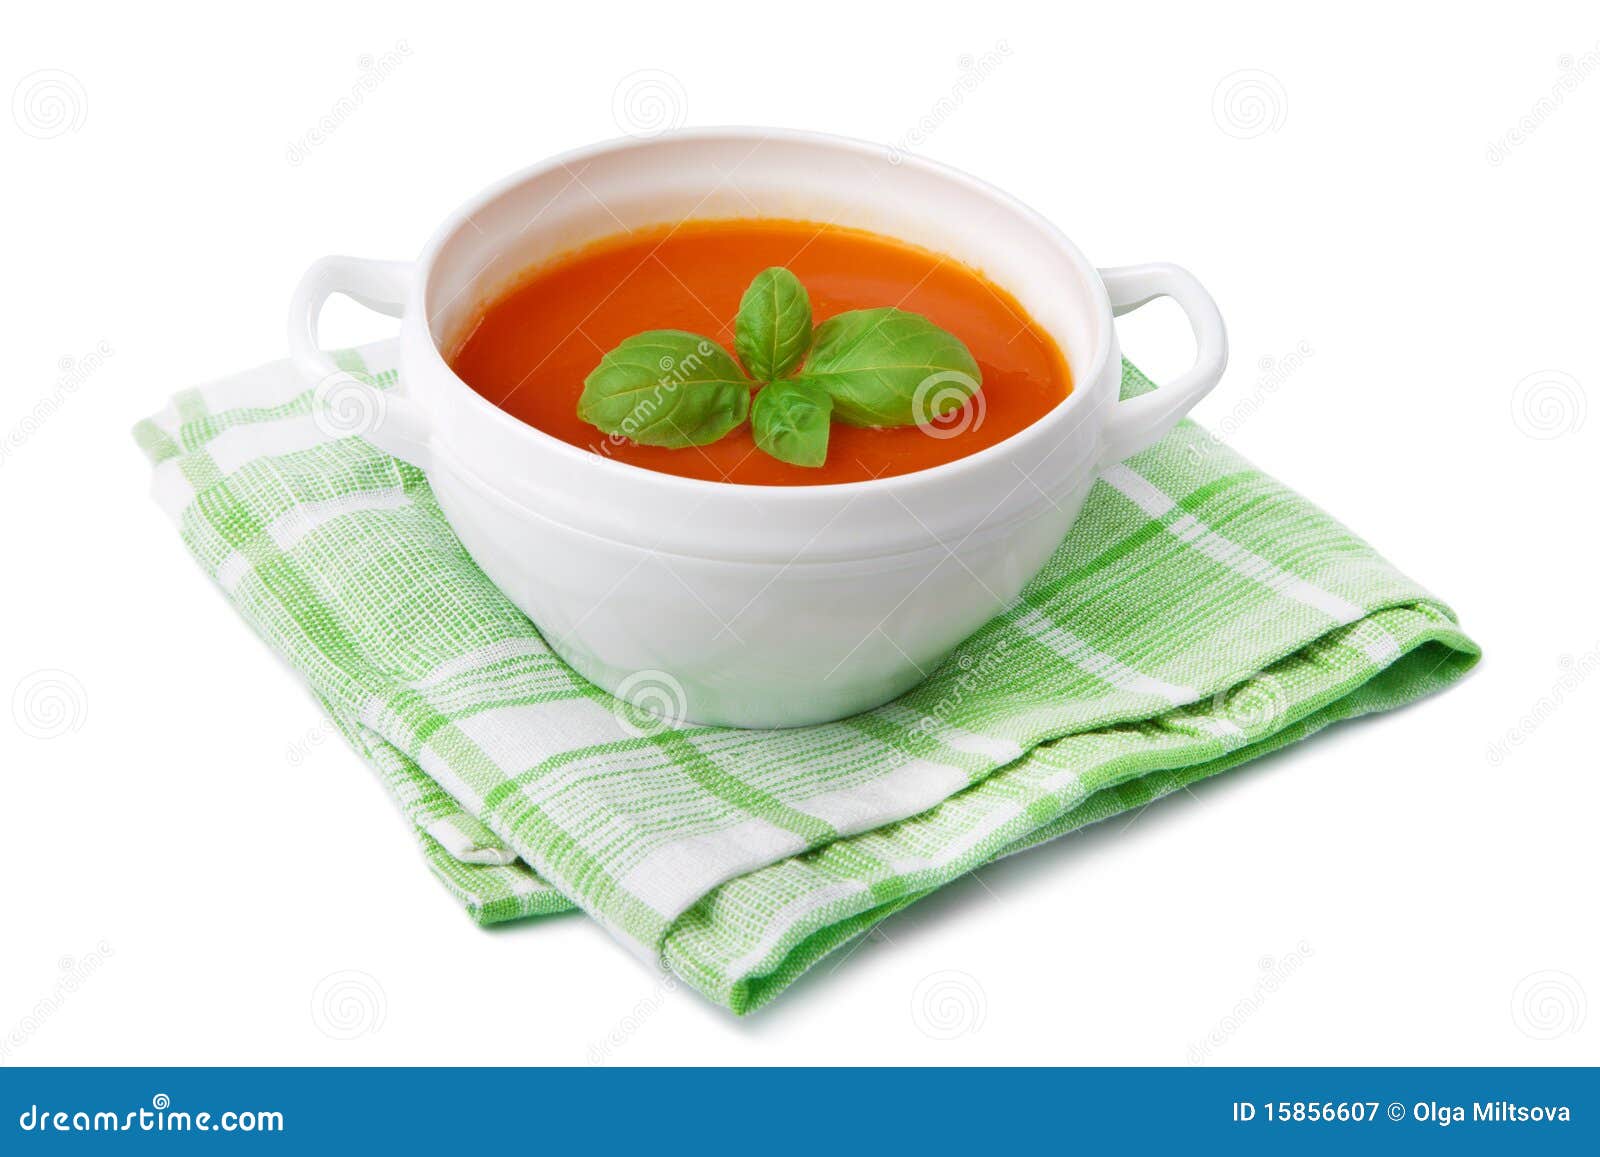 Tomato soup isolated stock image. Image of plate, liquid - 15856607